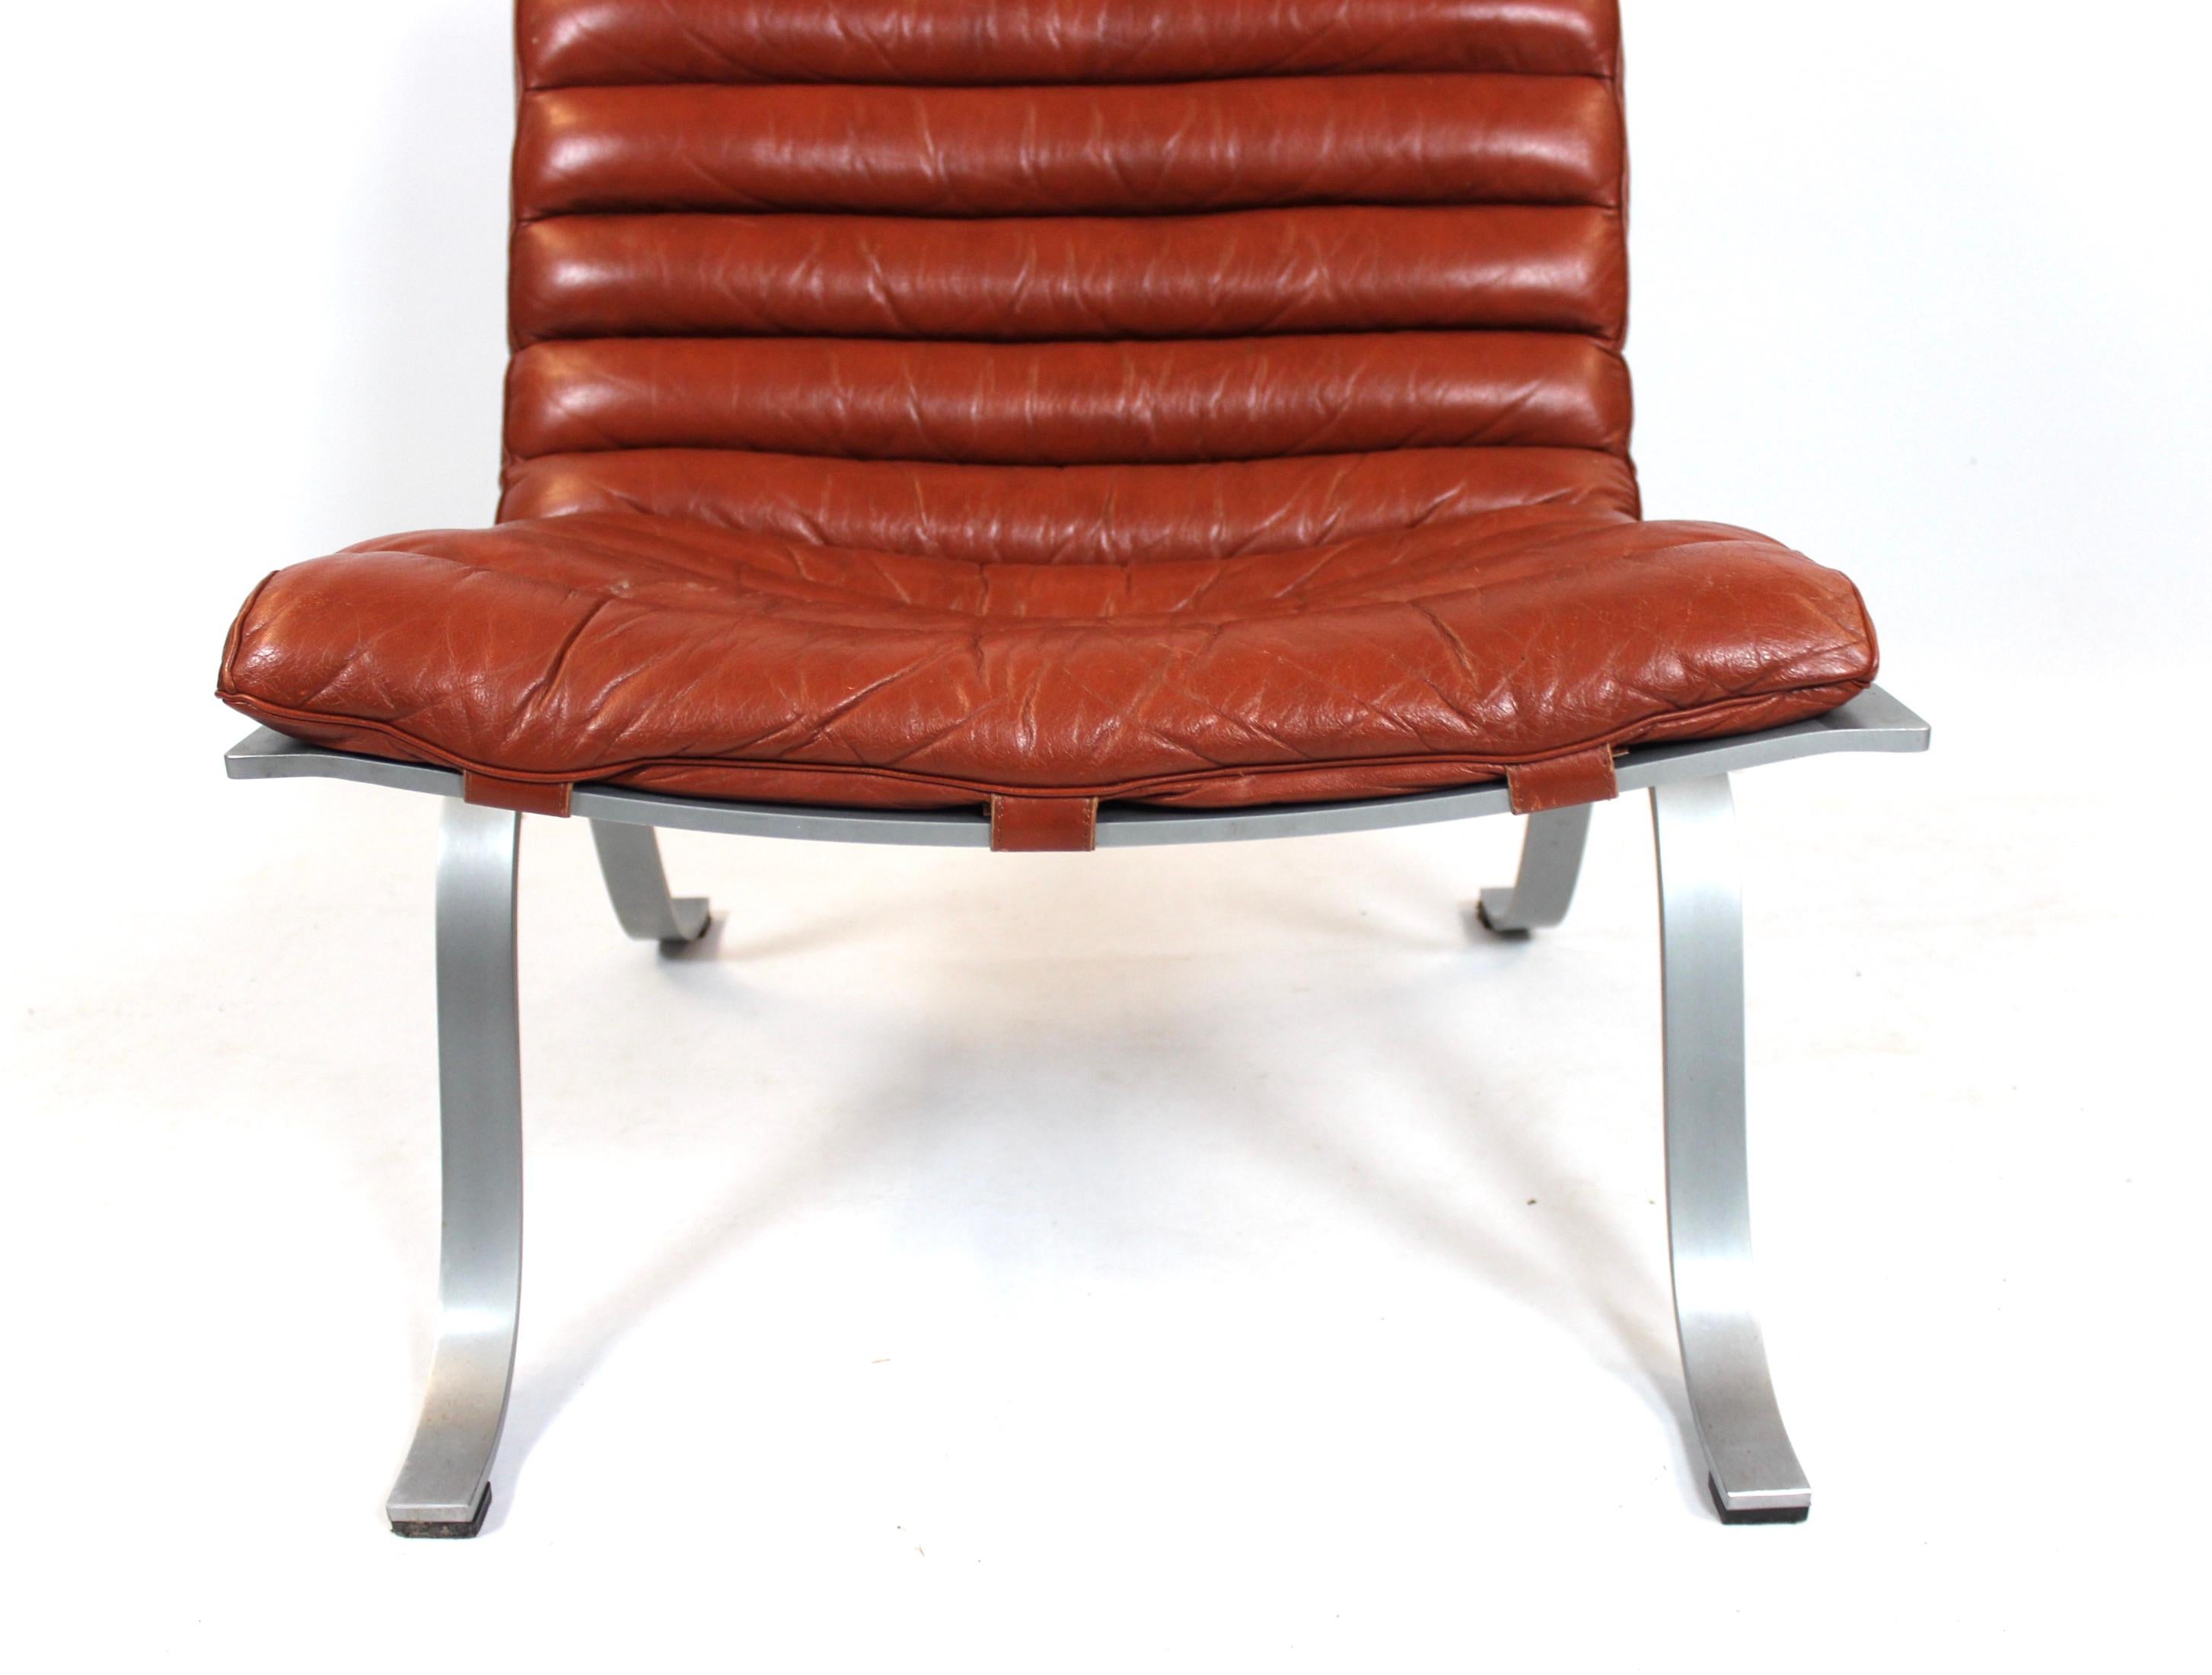 Scandinavian Modern Easy Chair, Model Ariet, of Red Leather and Steel Frame Designed by Arne Norell